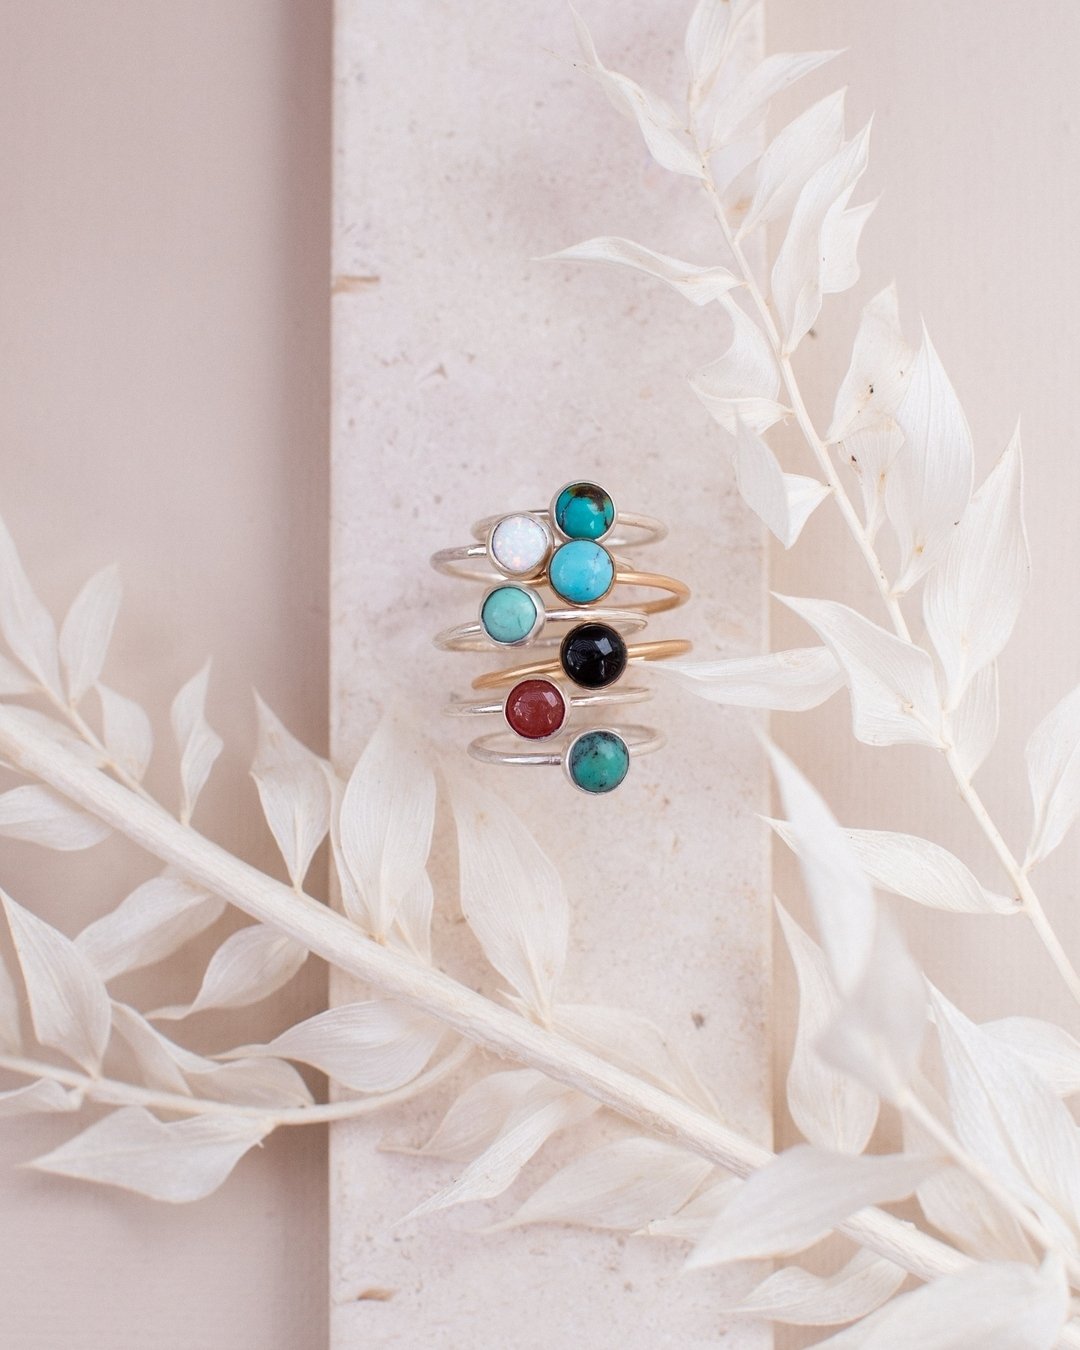 ☆Let's talk rings!☆
Did you know I make a multitude of ring styles and sizes in sterling silver and 14k gold-filled? Meaning I have rings in YOUR SIZE and the color won't rub off. Yes indeed - you can wear these rings in the shower, the pool, to wash